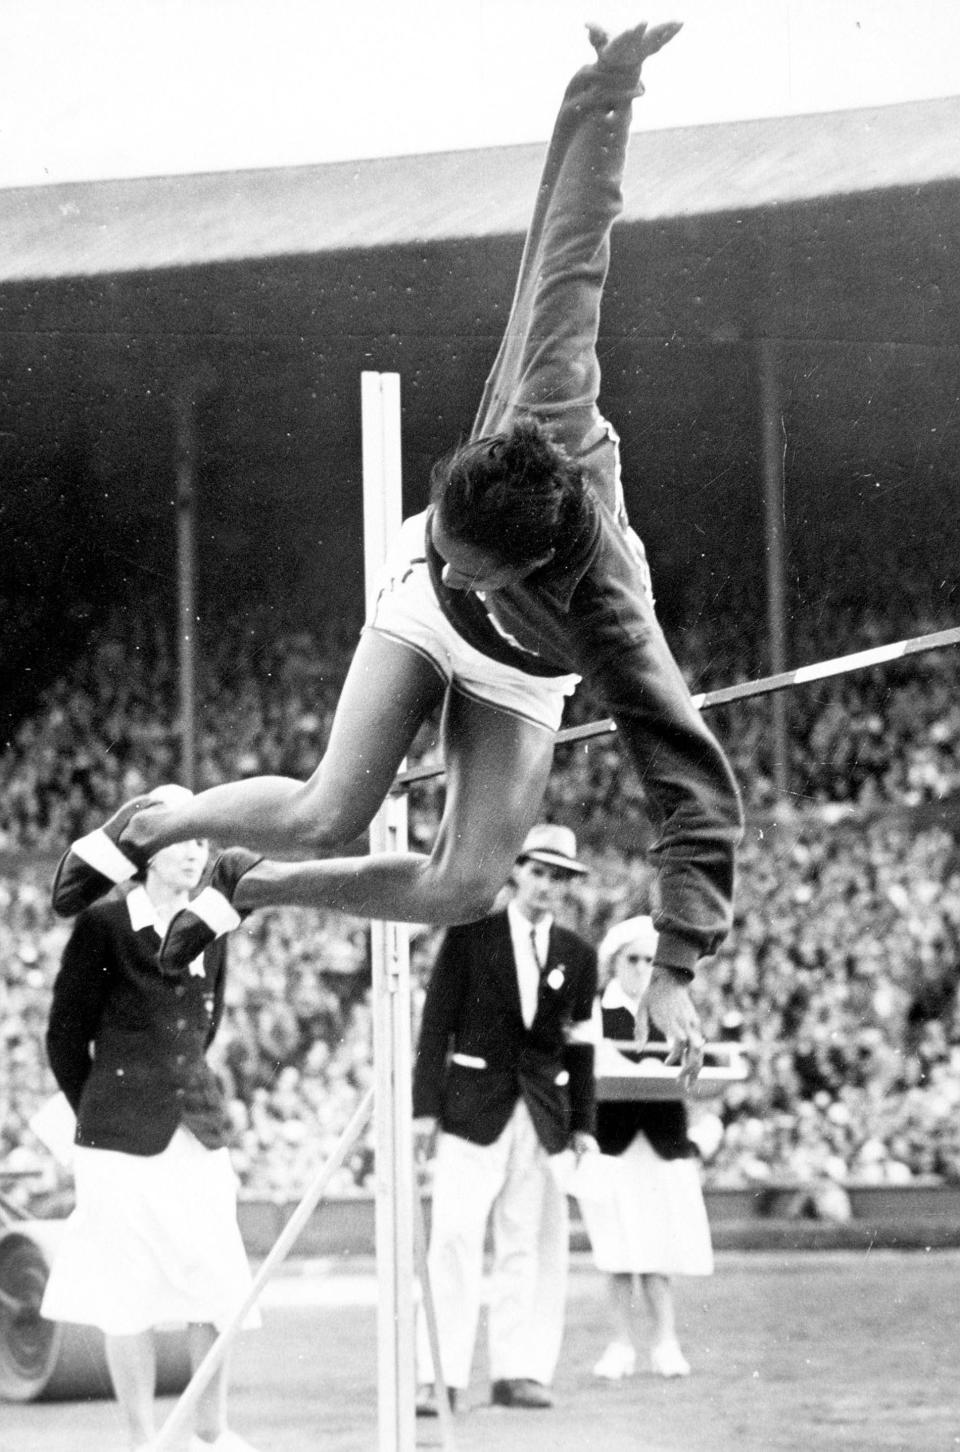 <p>Coachman, a high jumper who grew up in the segregated South, was the first African-American woman to win an <a href="http://www.webcitation.org/5t4SdPT9d" target="_blank">Olympic gold medal</a> in 1948.</p> <p>Coachman's father didn't approve of her initial training -- which involved practicing on a homemade high jump. </p> <p>"He said, 'sit on the porch and act like a lady,'" Coachman told <a href="http://www.today.com/video/today/48547505#48547505" target="_blank">NBC</a> in a 2012 interview. "But I didn't do that."</p>